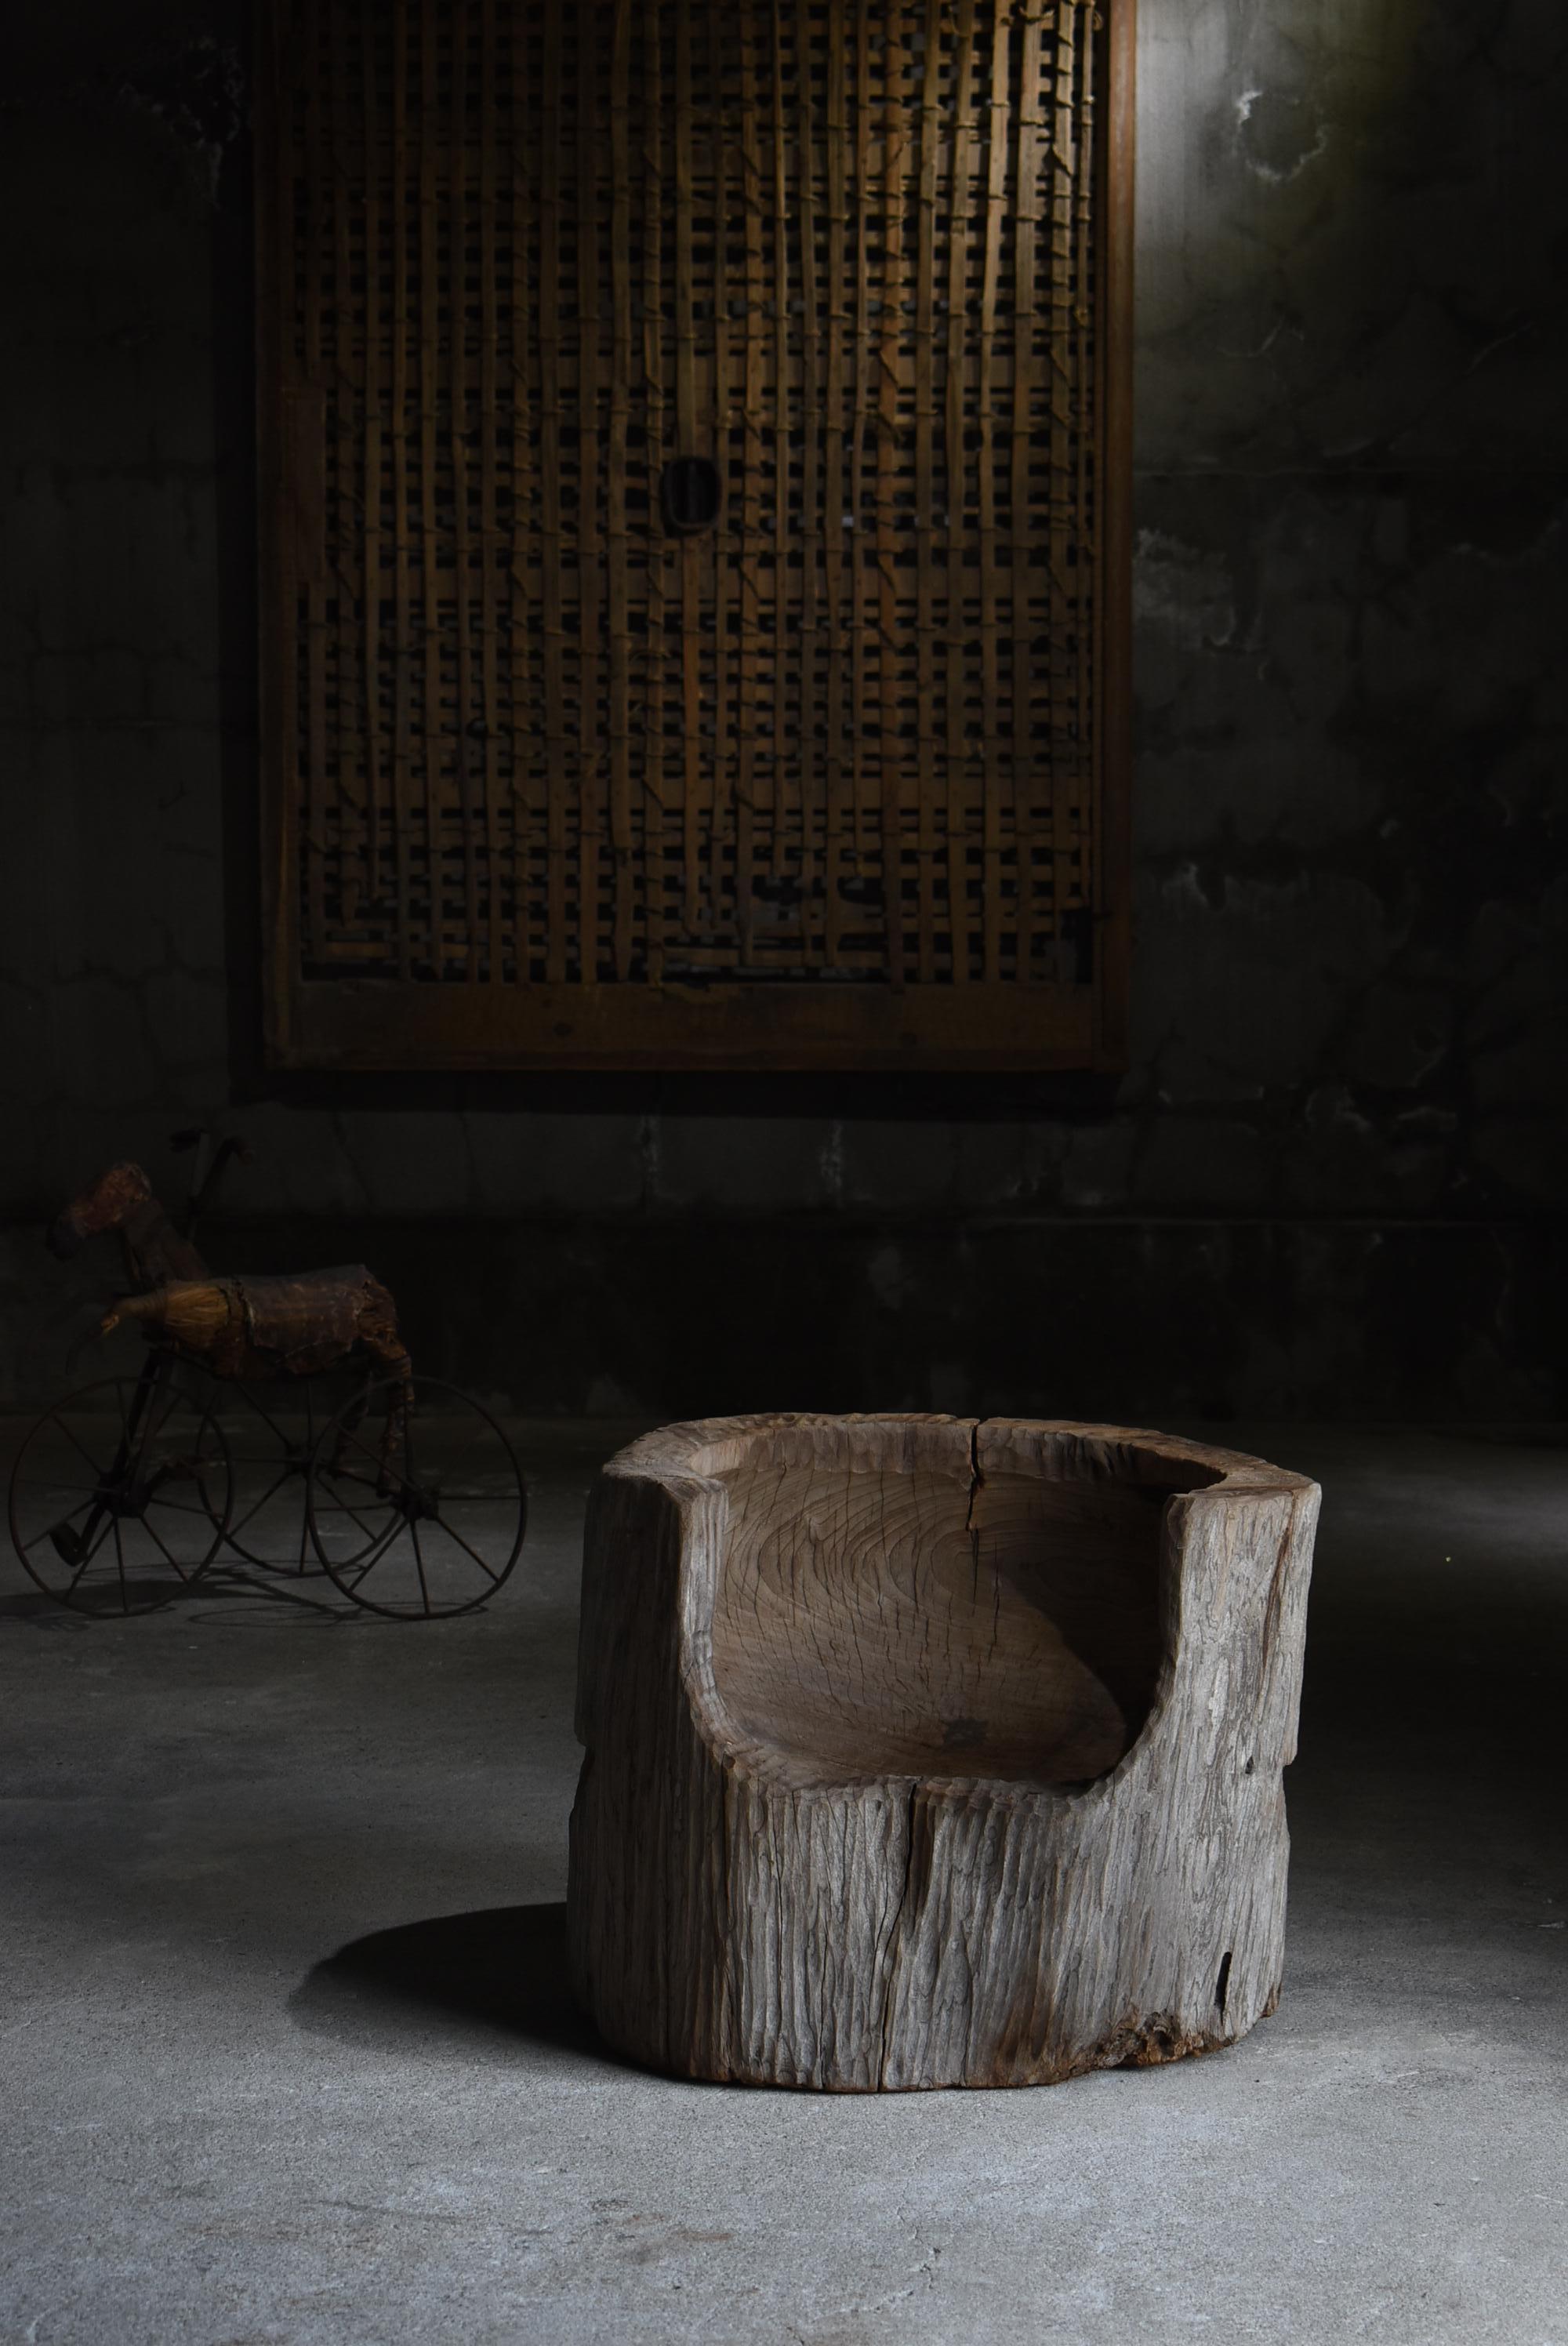 This is a very old primitive style chair.
It was made in the Meiji era.
(1860s to 1900s AD).

The material is zelkova wood.
It is a powerful chair boldly carved out of a large zelkova tree.
The grain of the zelkova wood is distinctive and very